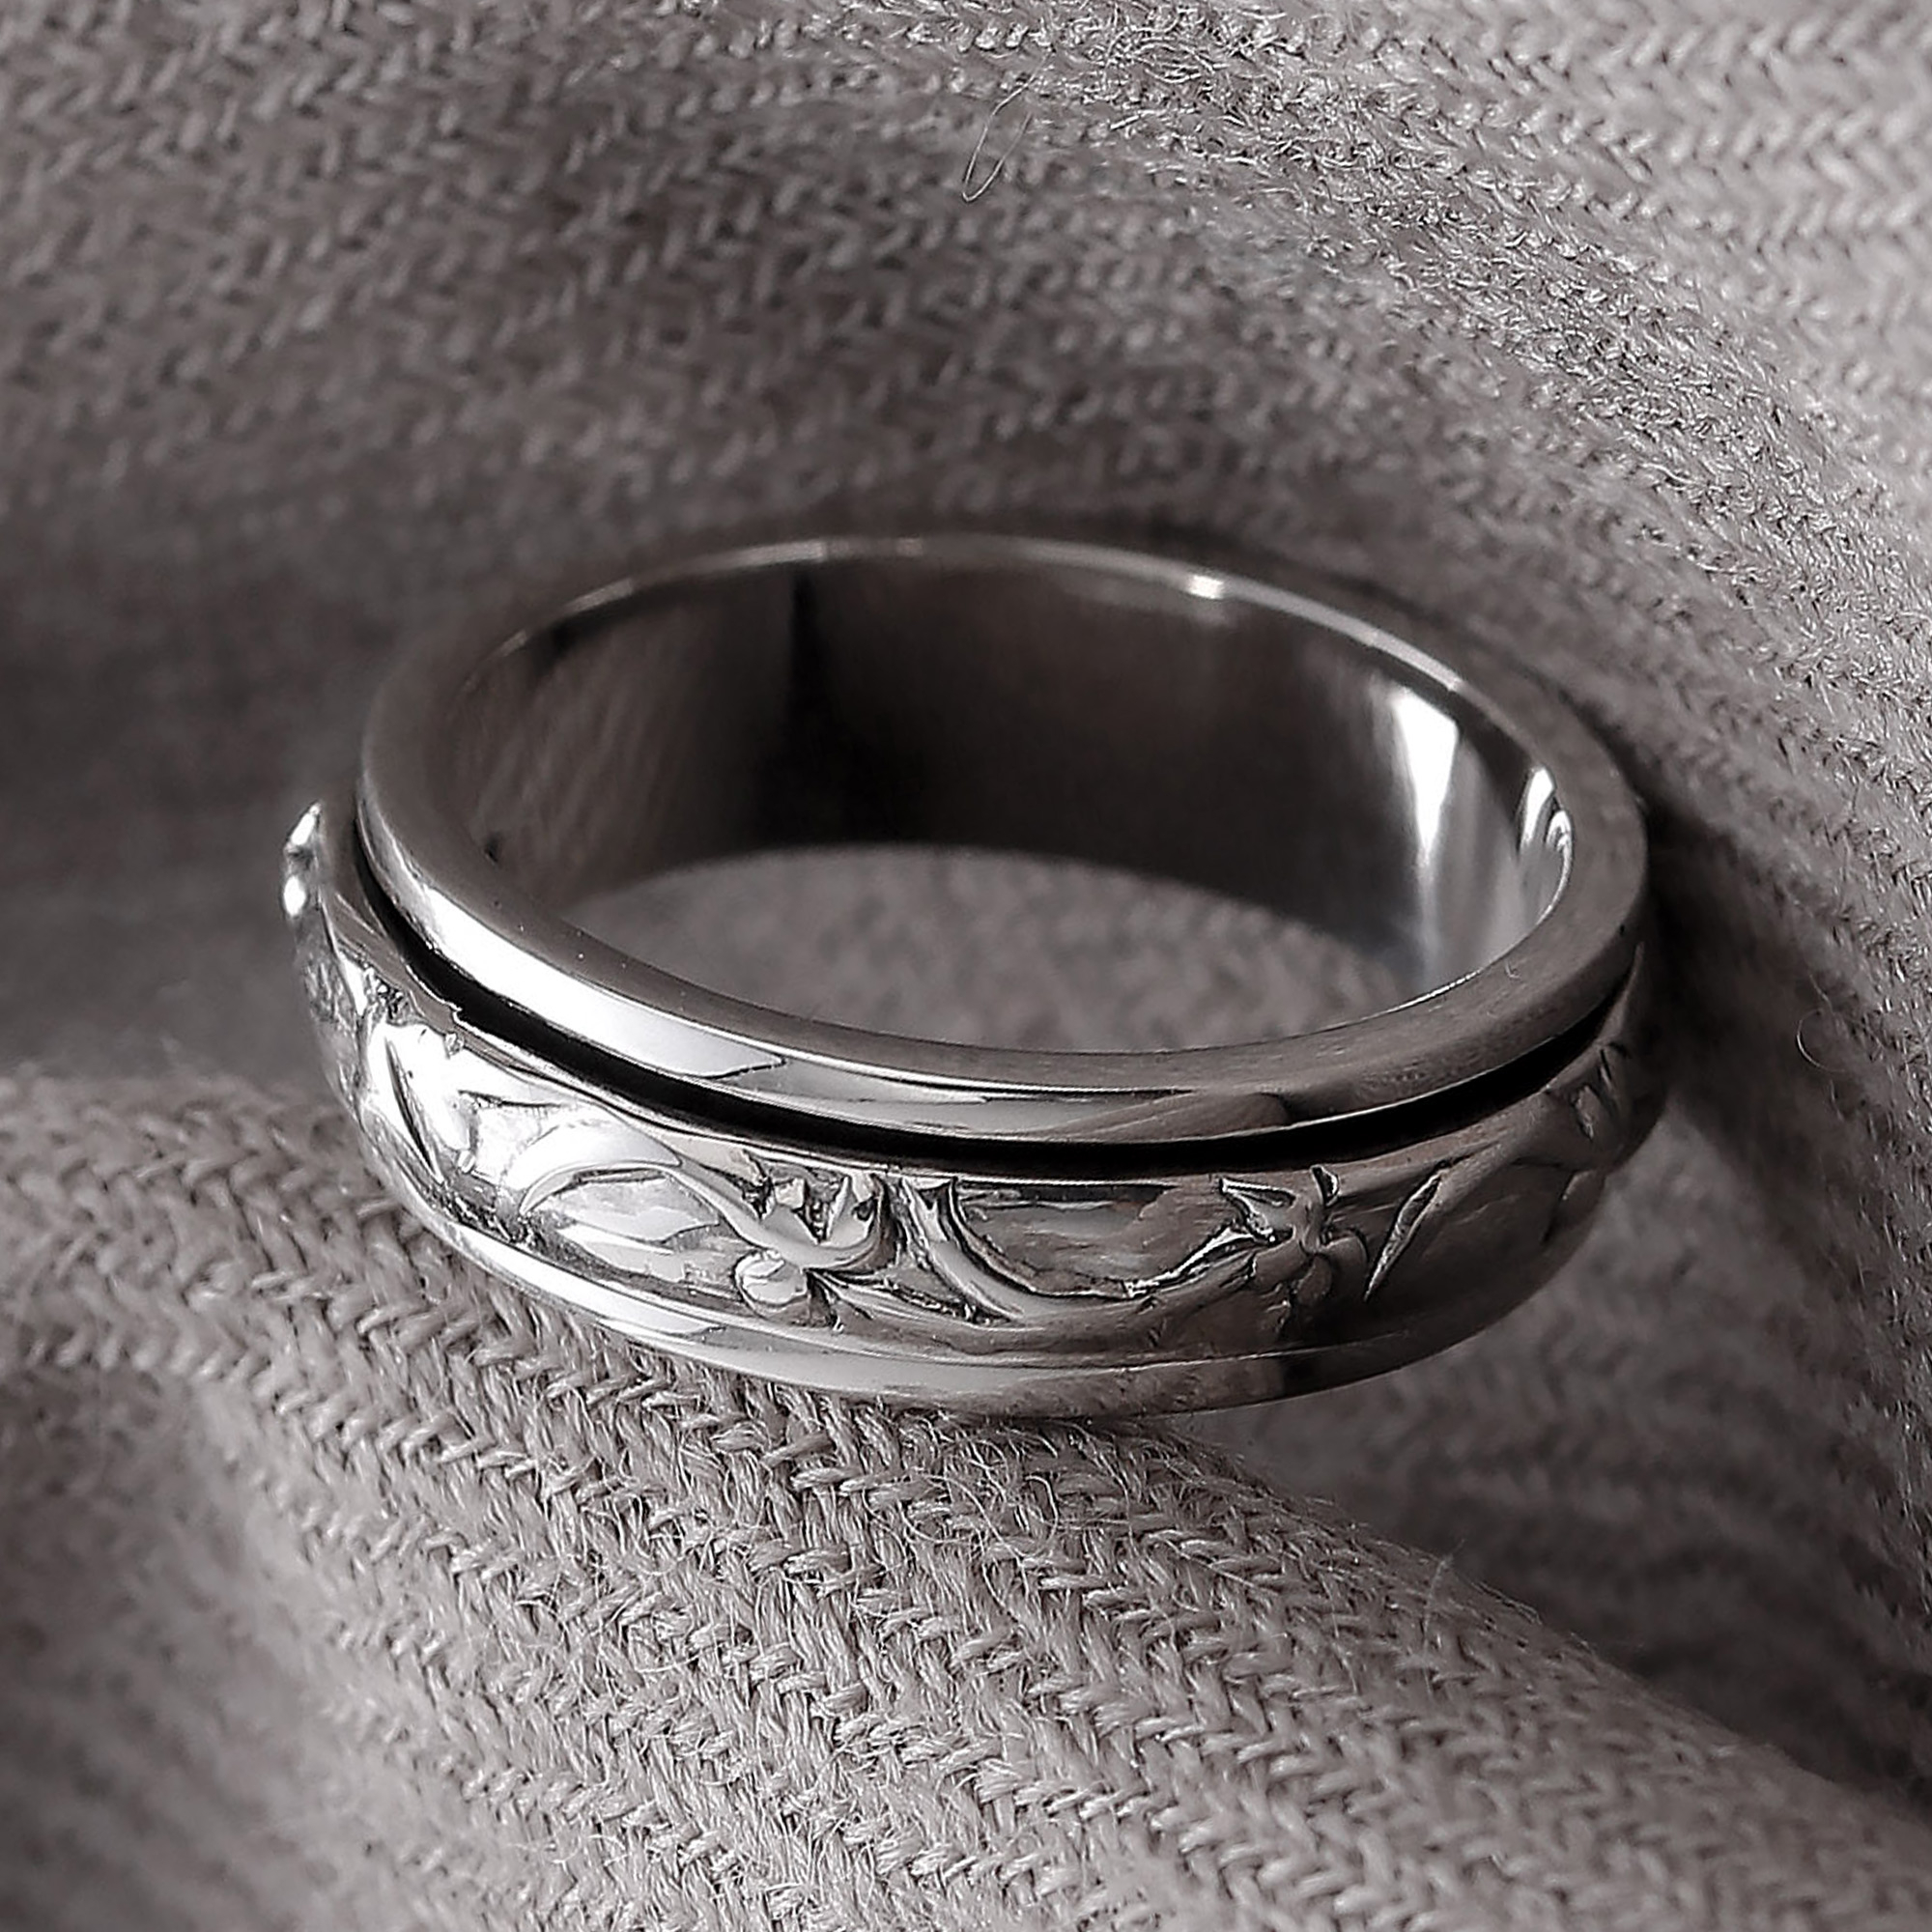 Details about   Solid 925 Sterling Silver Copper Brass Spinner Ring Handmade Jewelry gs136